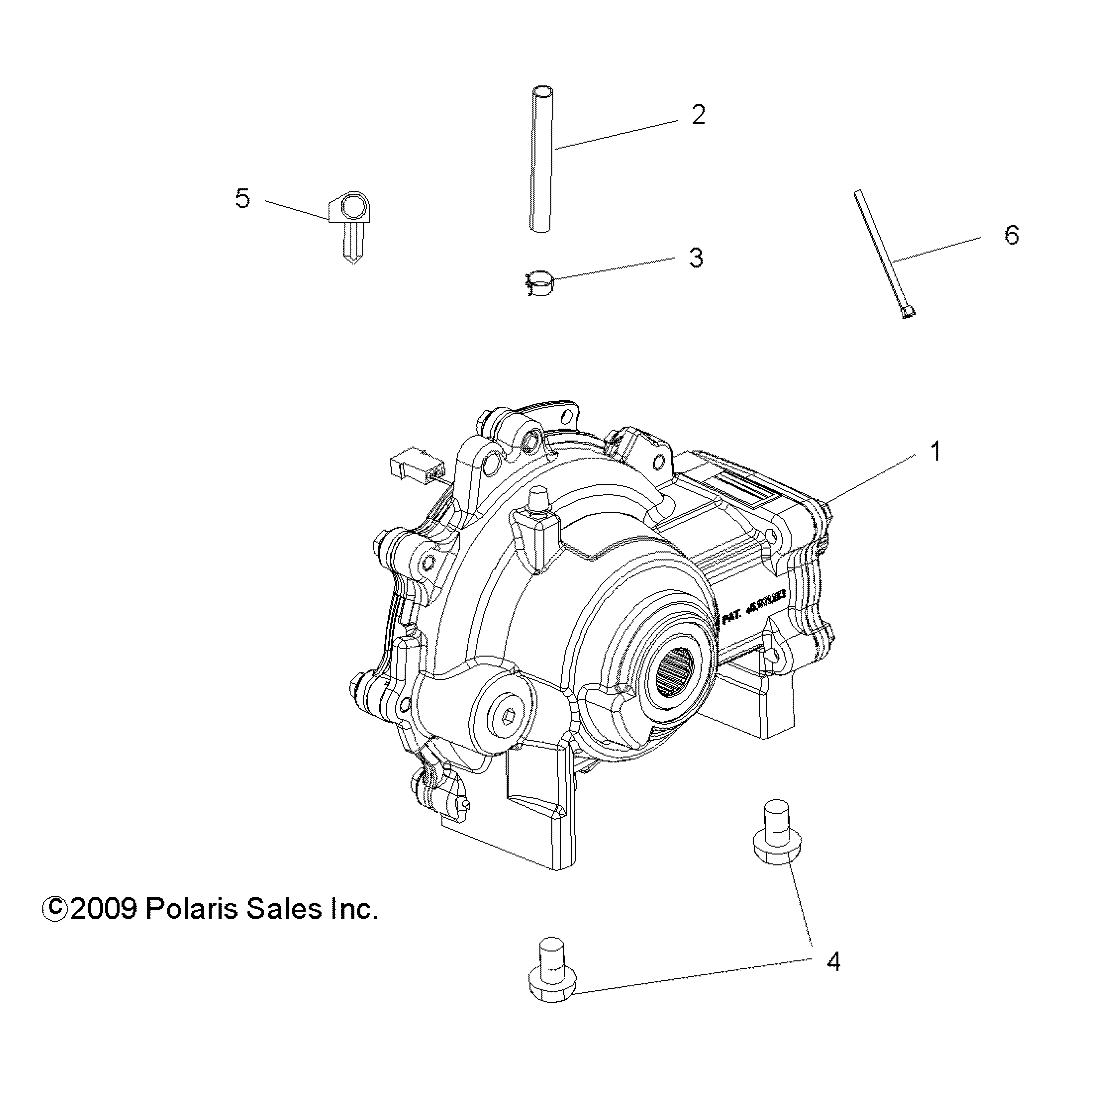 Part Number : 1332857 ASM-GEARCASE FRONT